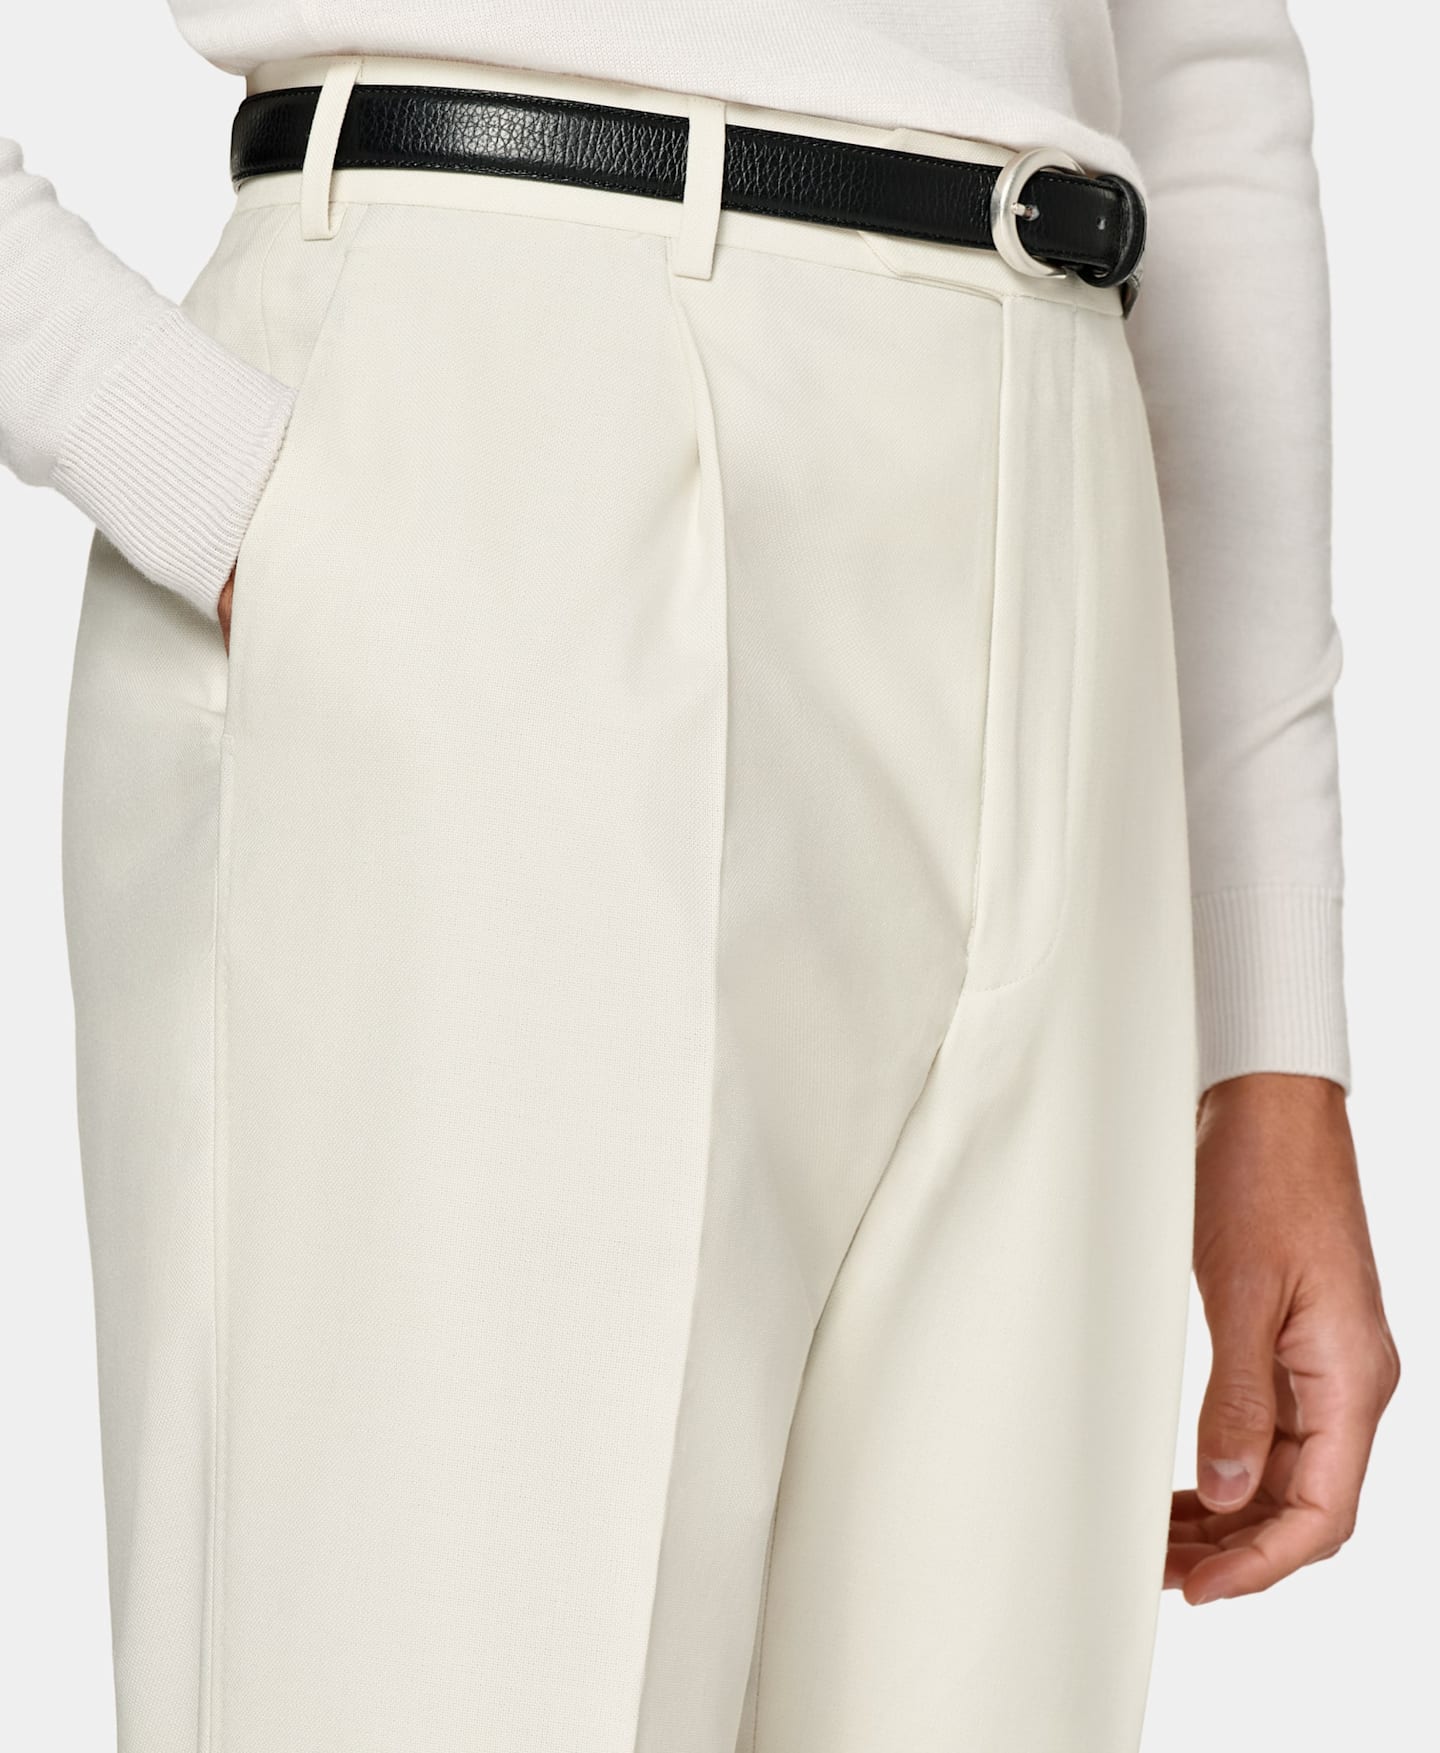 Off-white straight-fit trousers with black belt and white knit.